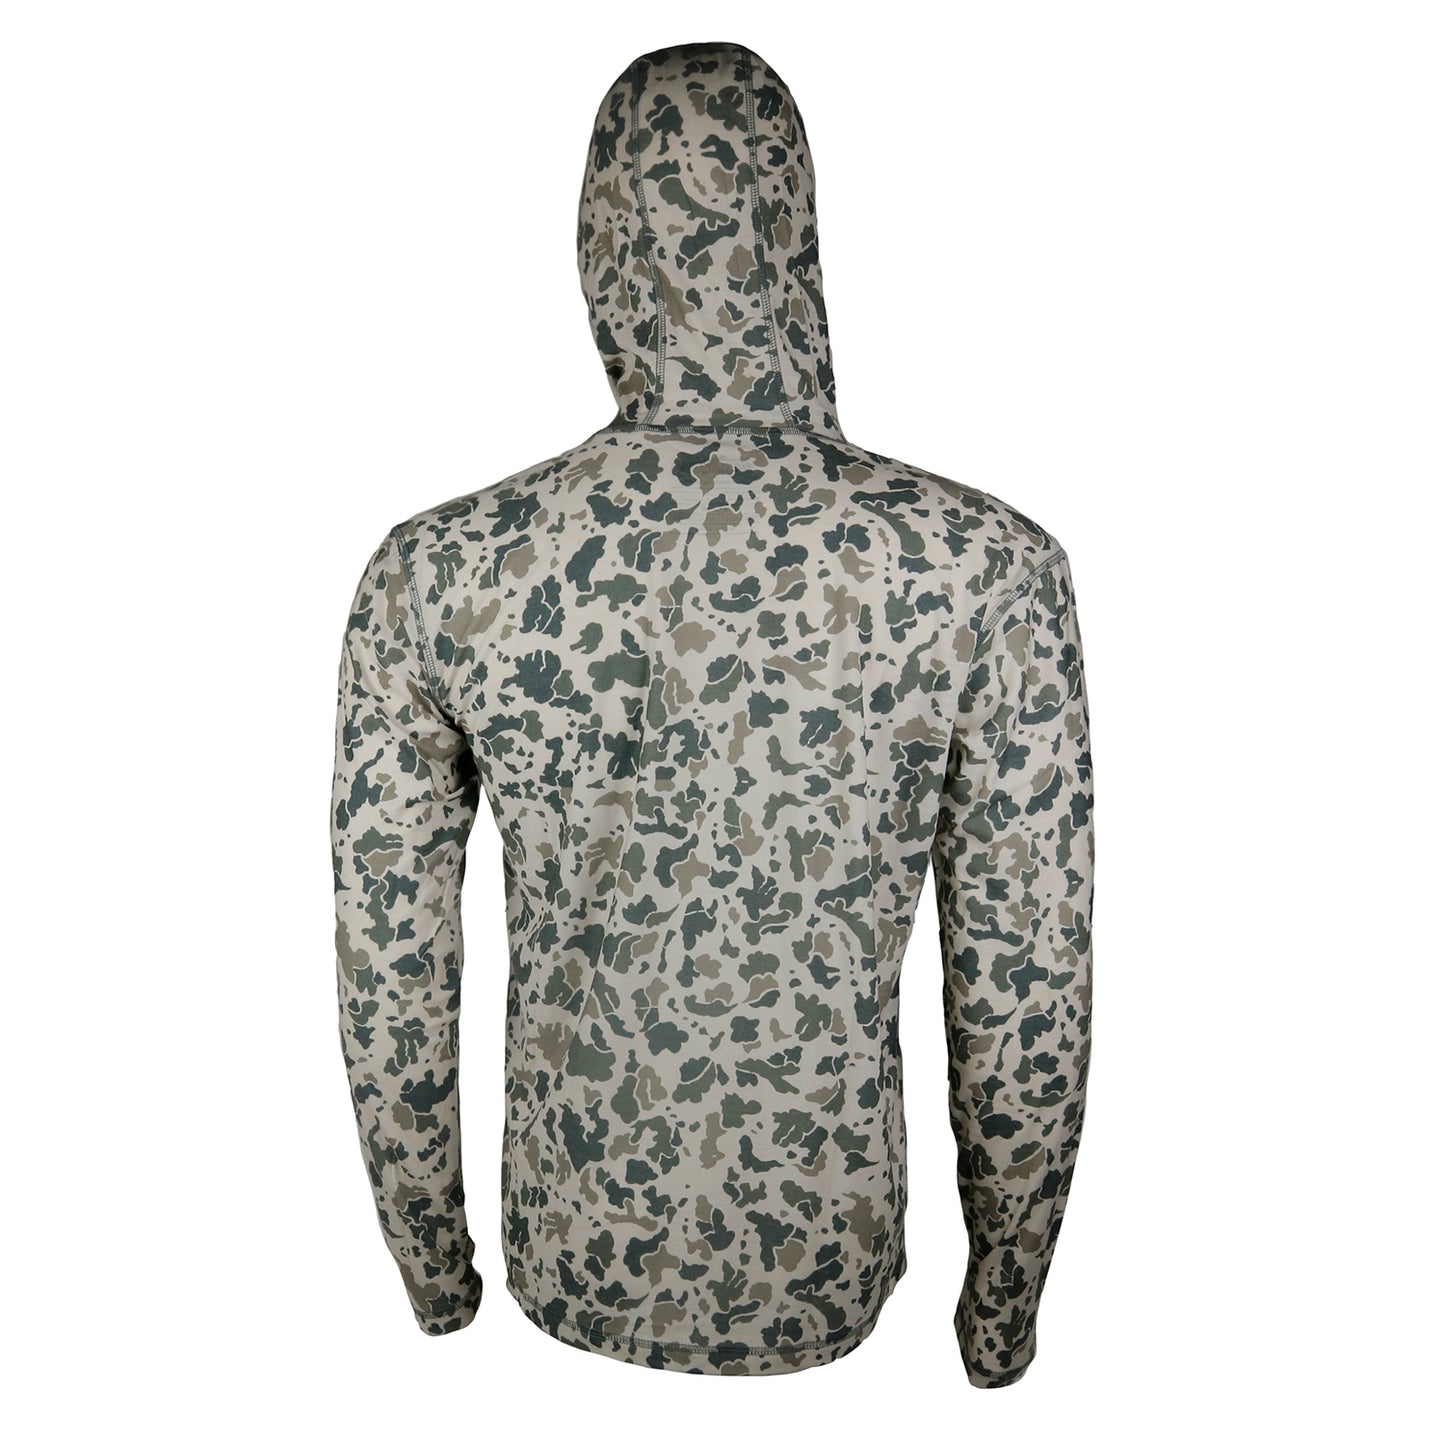 A camo printed sun hoody from the back with the hood up.